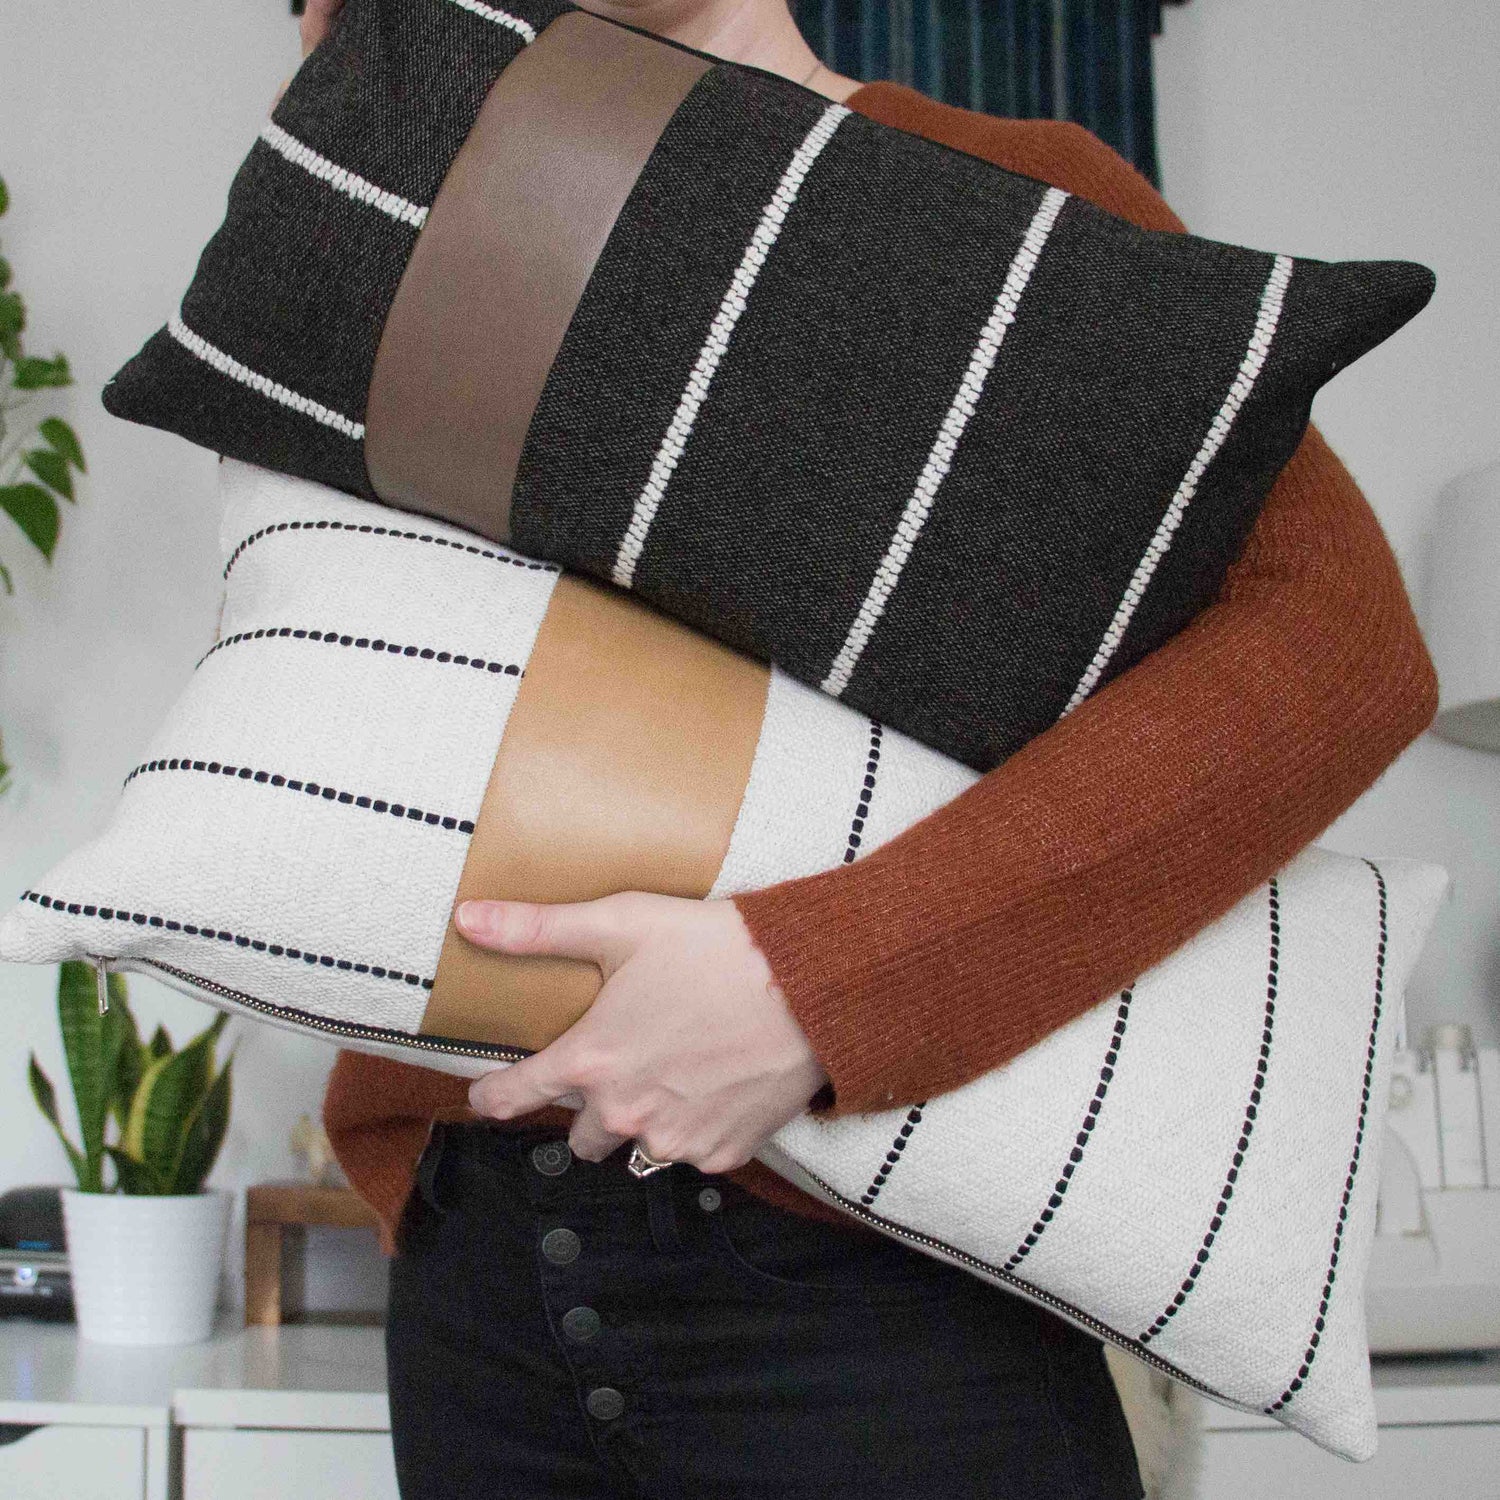 Black and white striped pillows